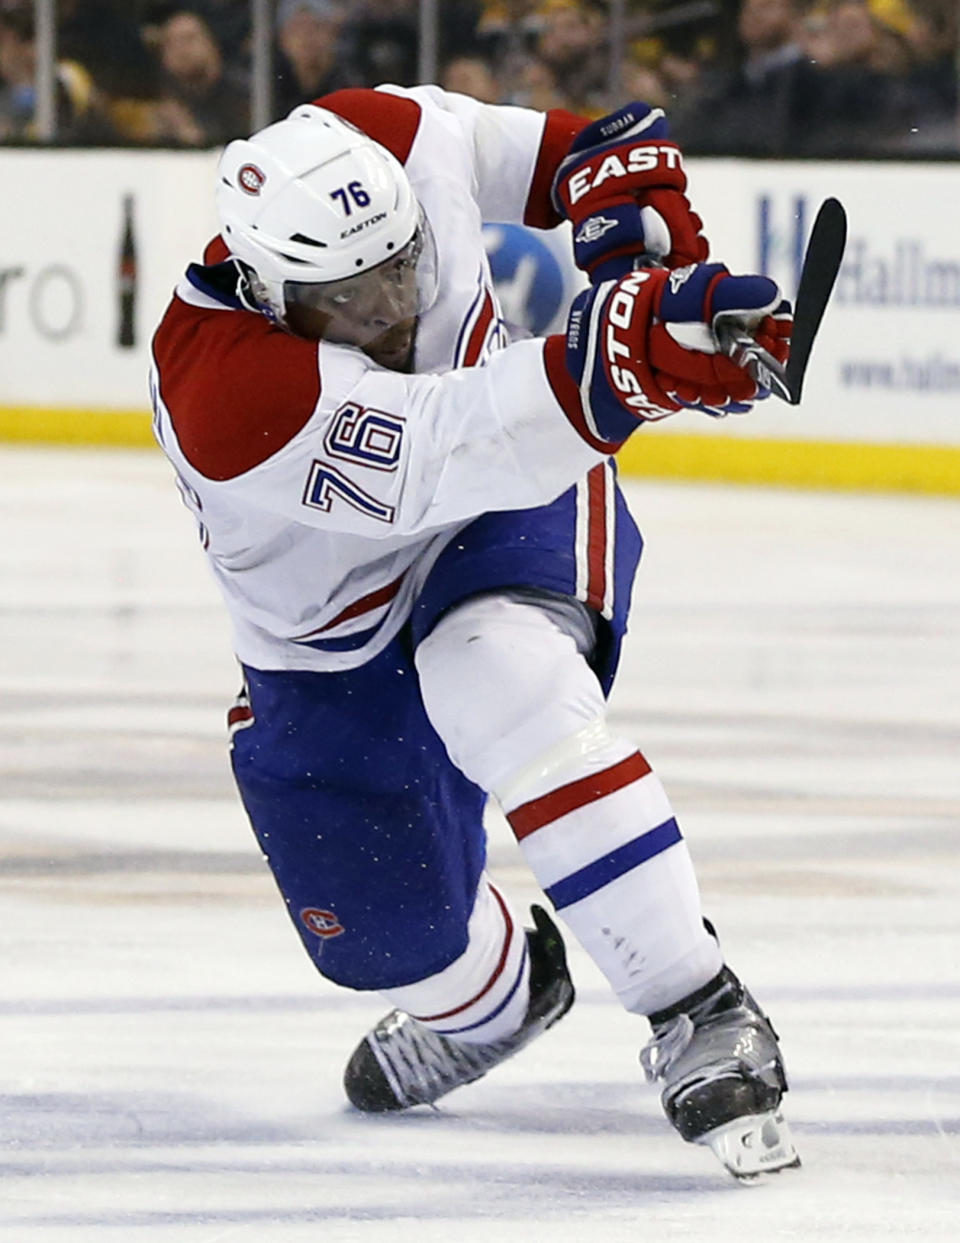 Montreal Canadiens' P.K. Subban follows through on his game-winning goal in the second overtime period against the Boston Bruins in Game 1 of an NHL hockey second-round playoff series in Boston, Thursday, May 1, 2014. The Canadiens won 4-3. (AP Photo/Elise Amendola)